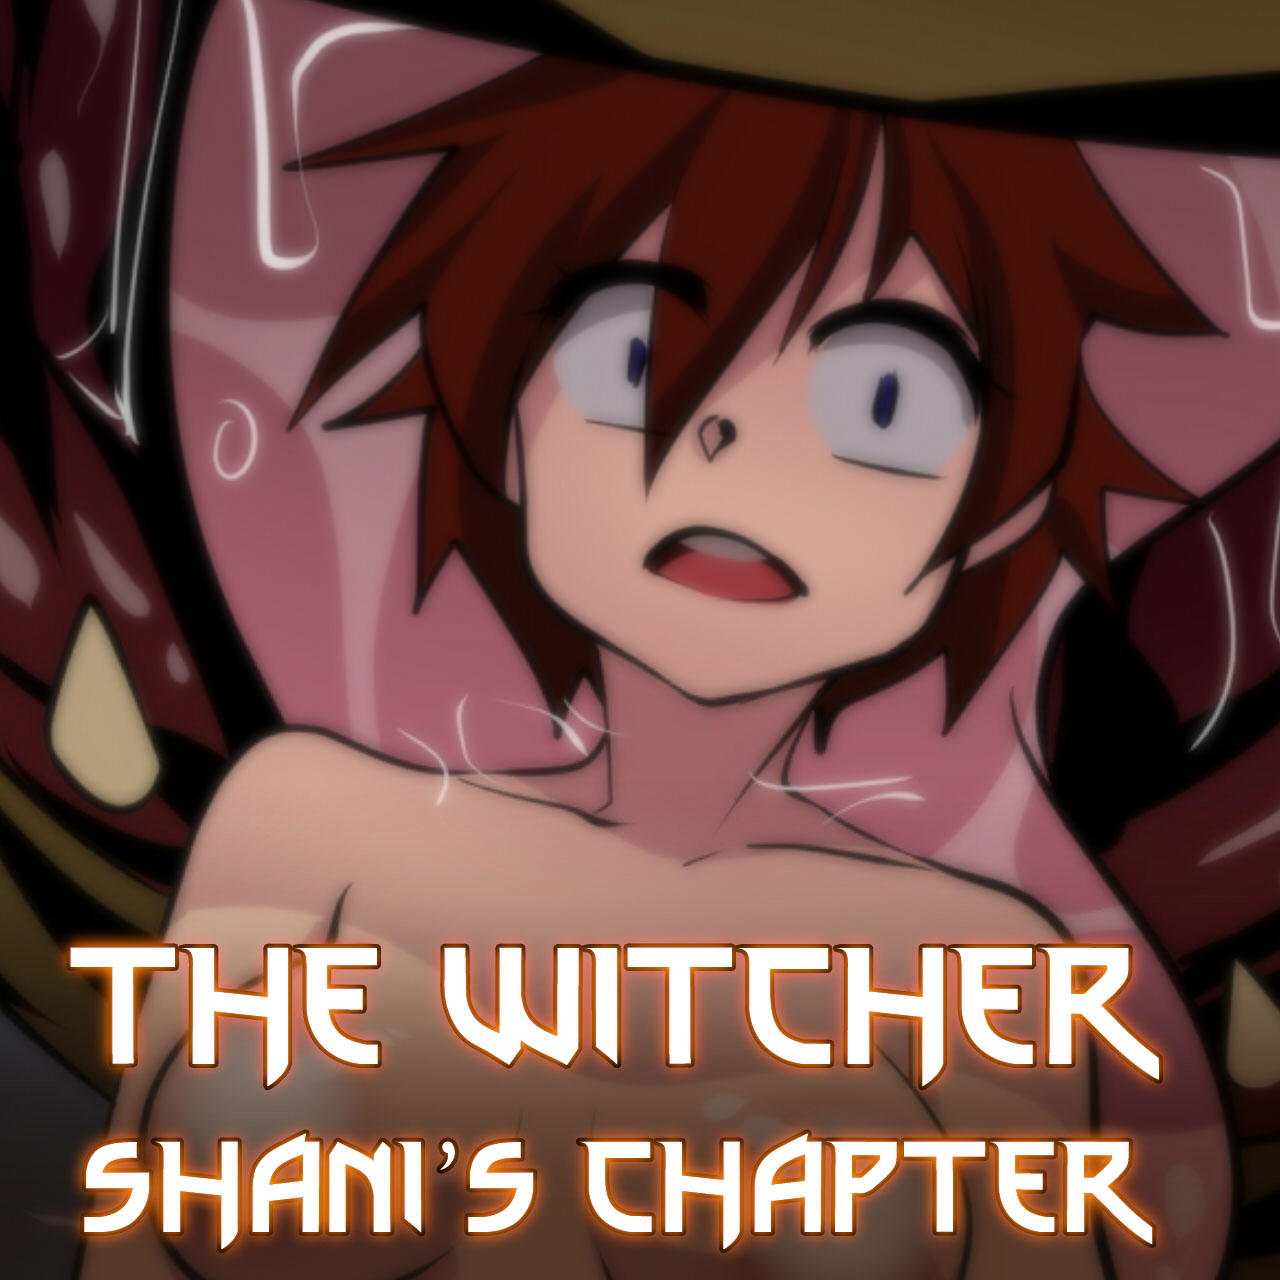 The Witcher: Shani's Chapter